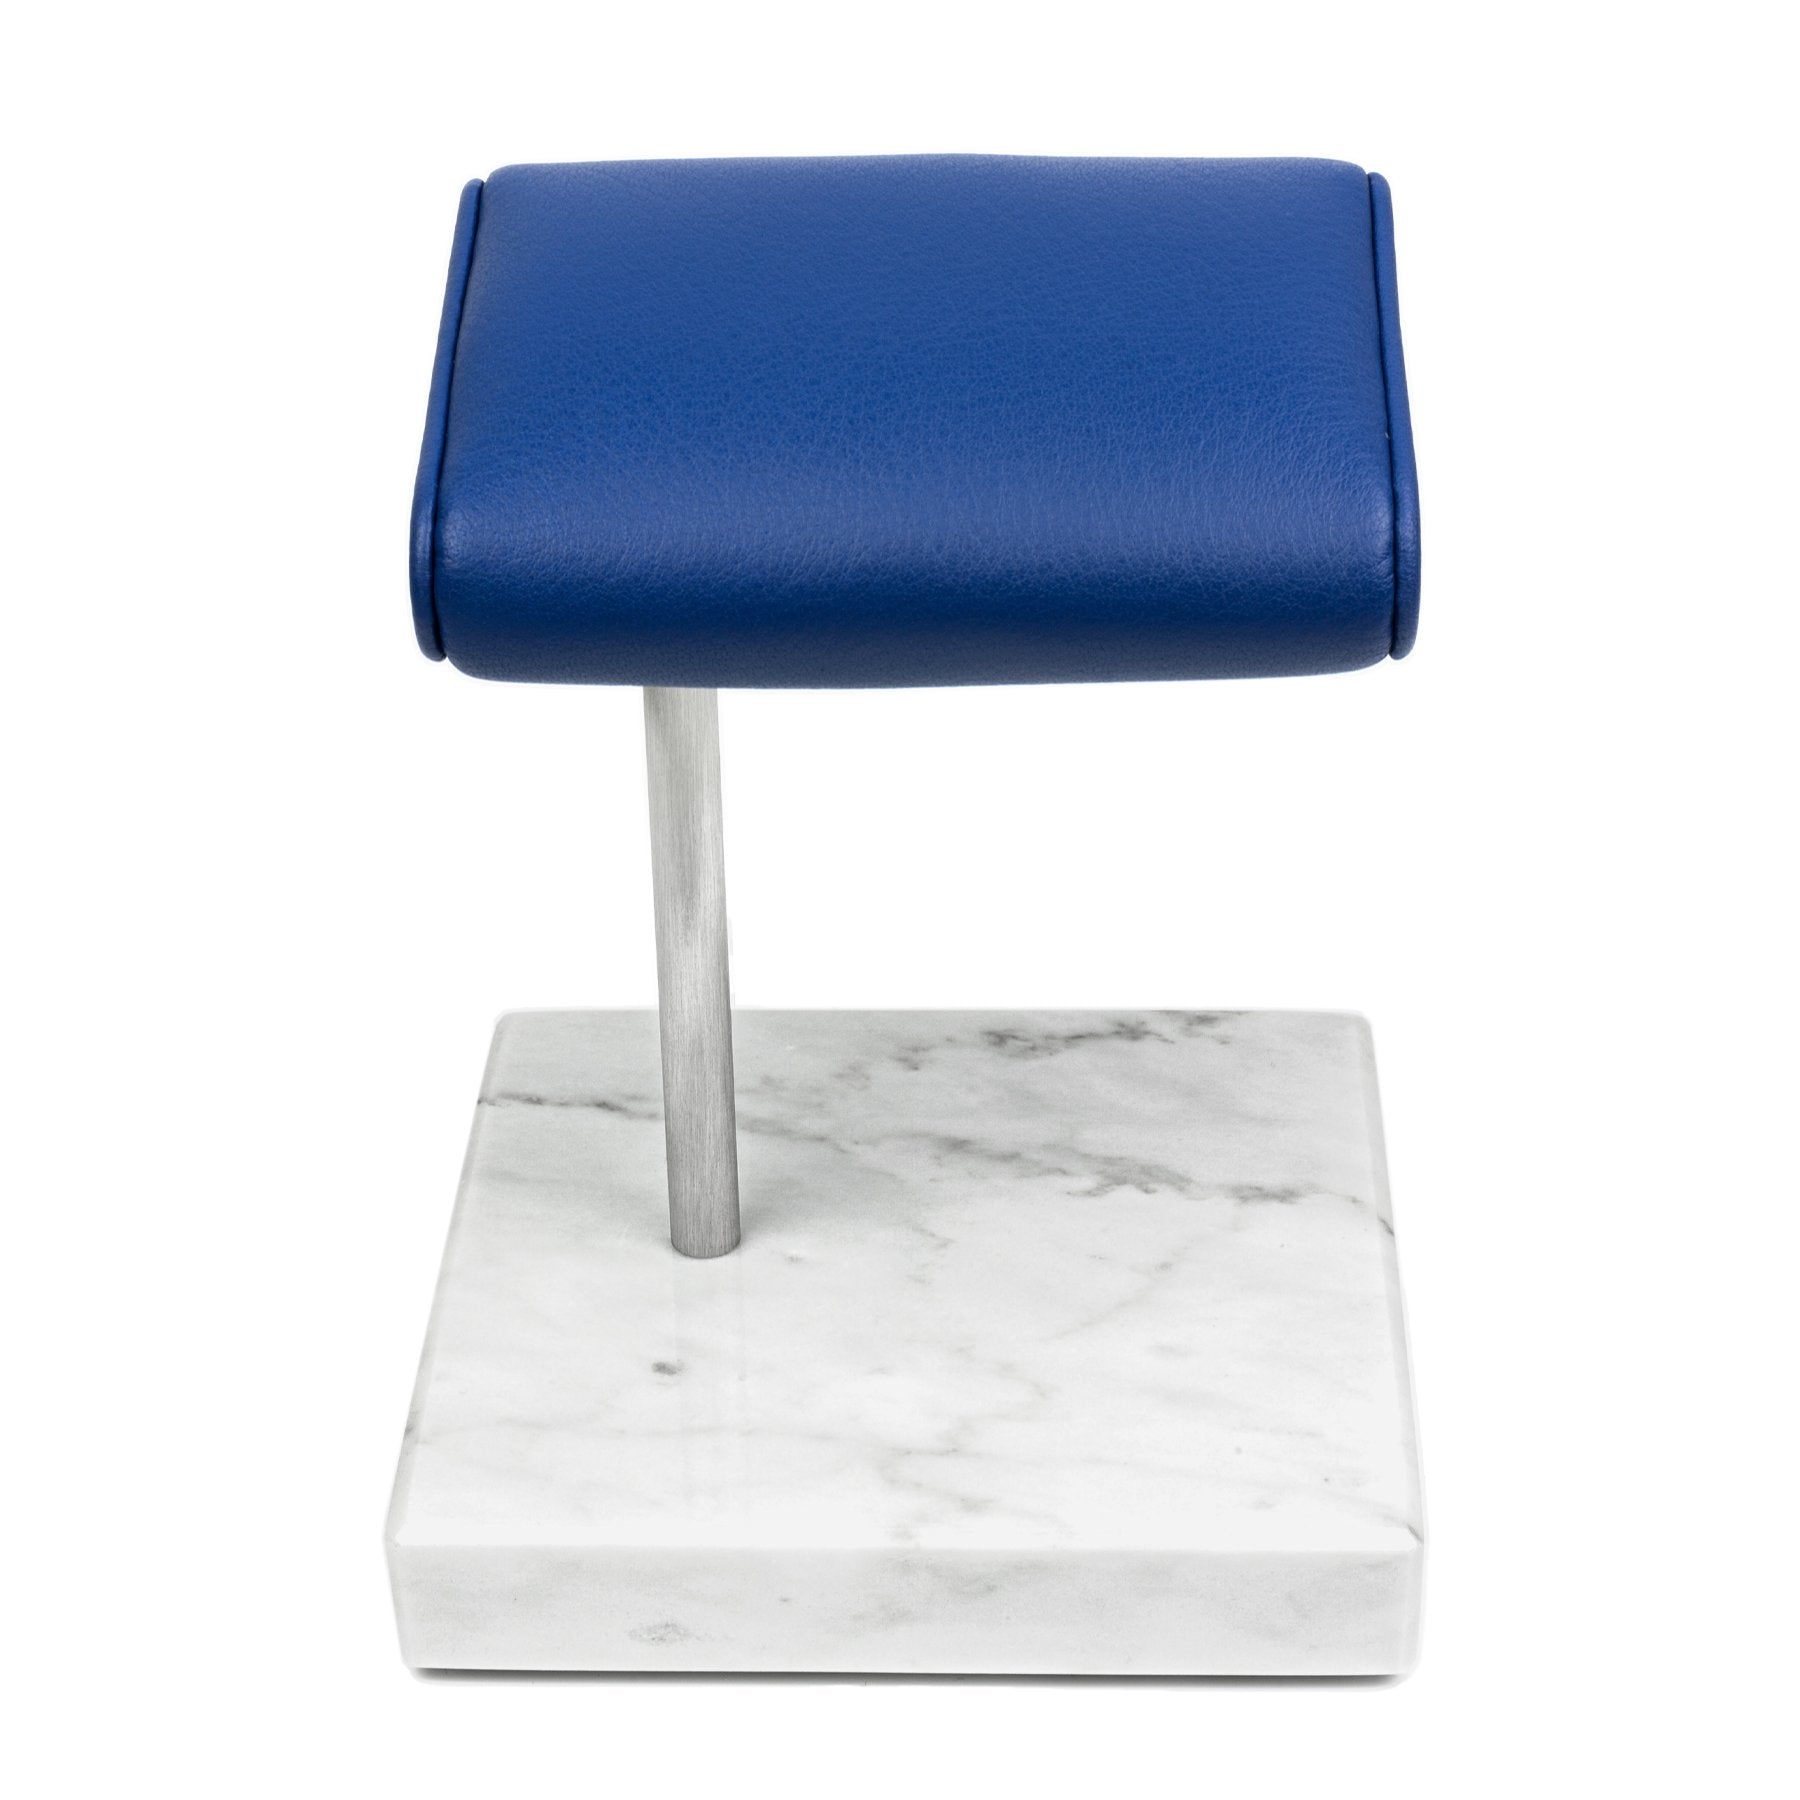 THE WATCH STAND SINGLE – SILVER & BLUE